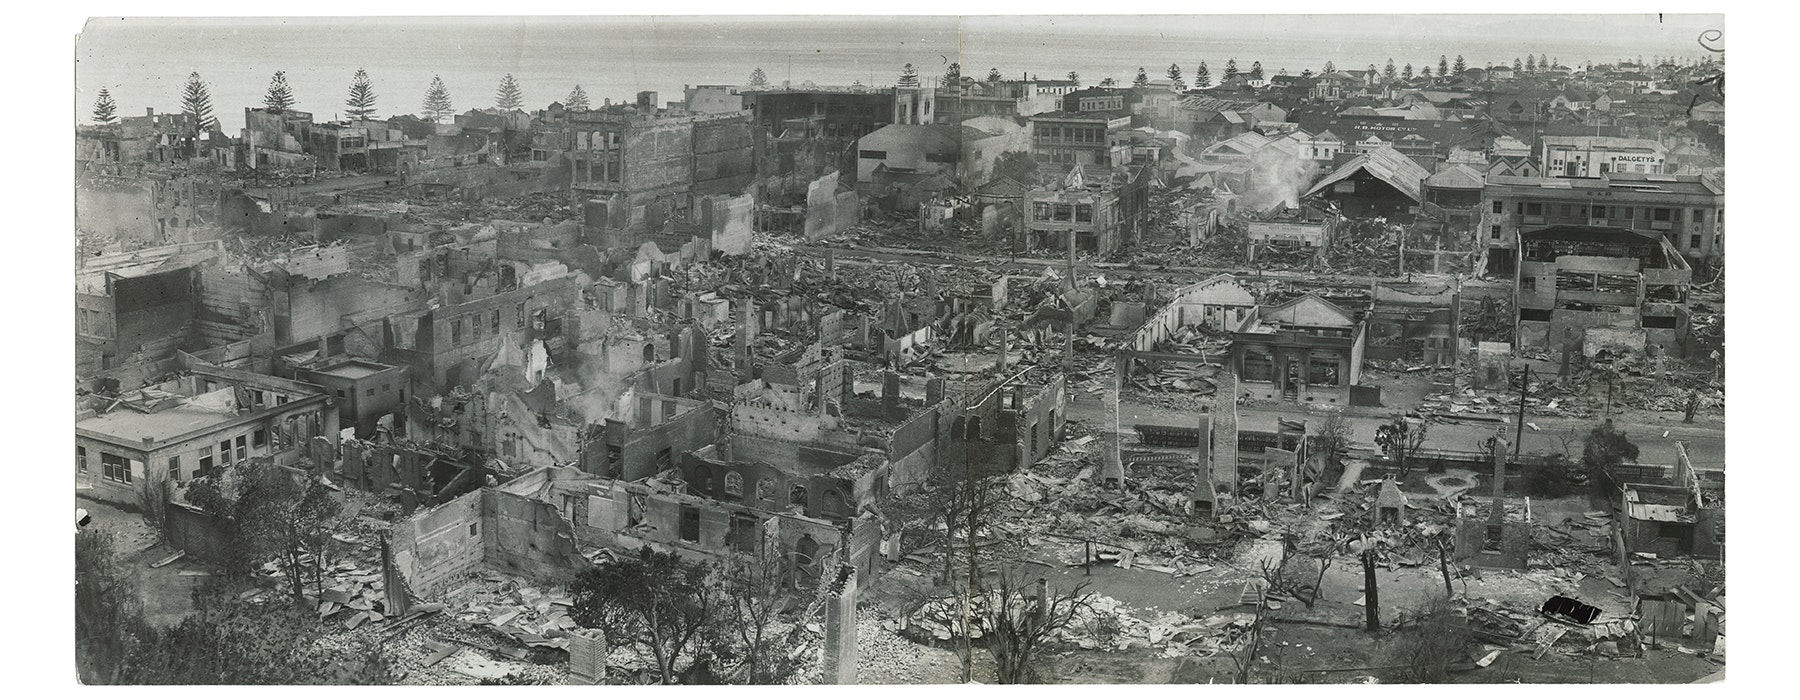 A black and white aerial photo of a city in ruins after an earthquake.